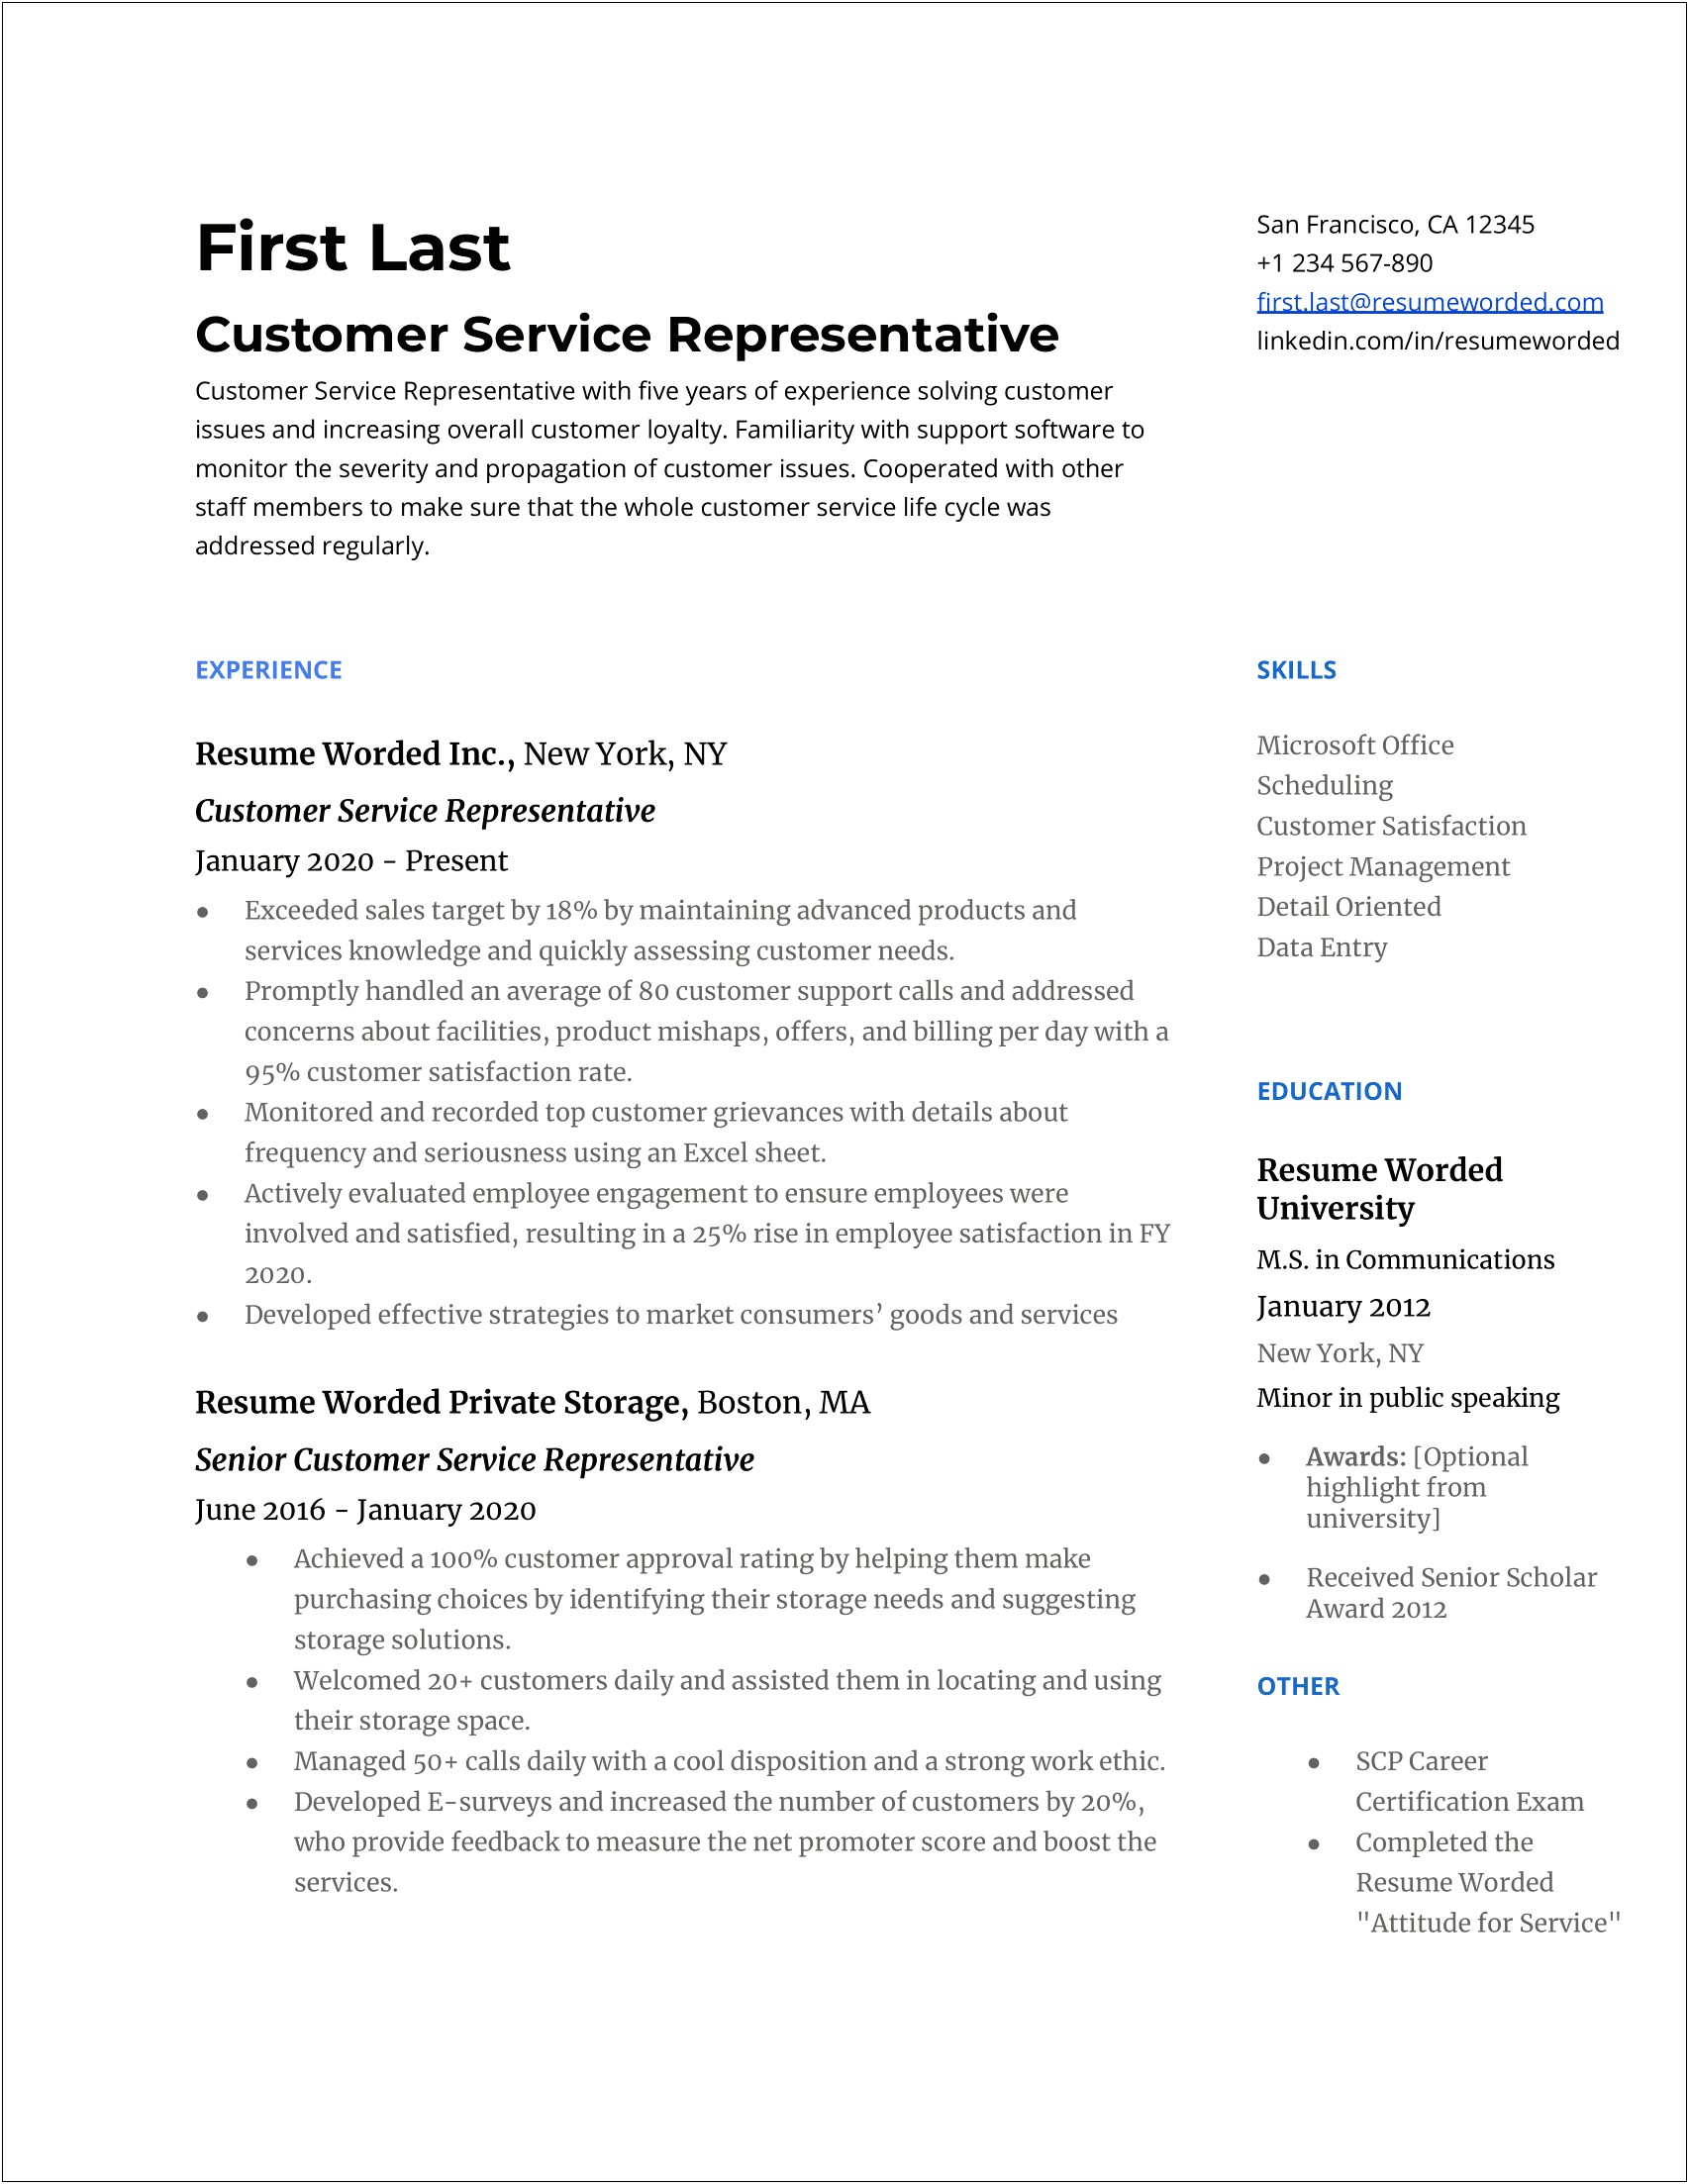 Handling Escalated Calls Wording For Resume